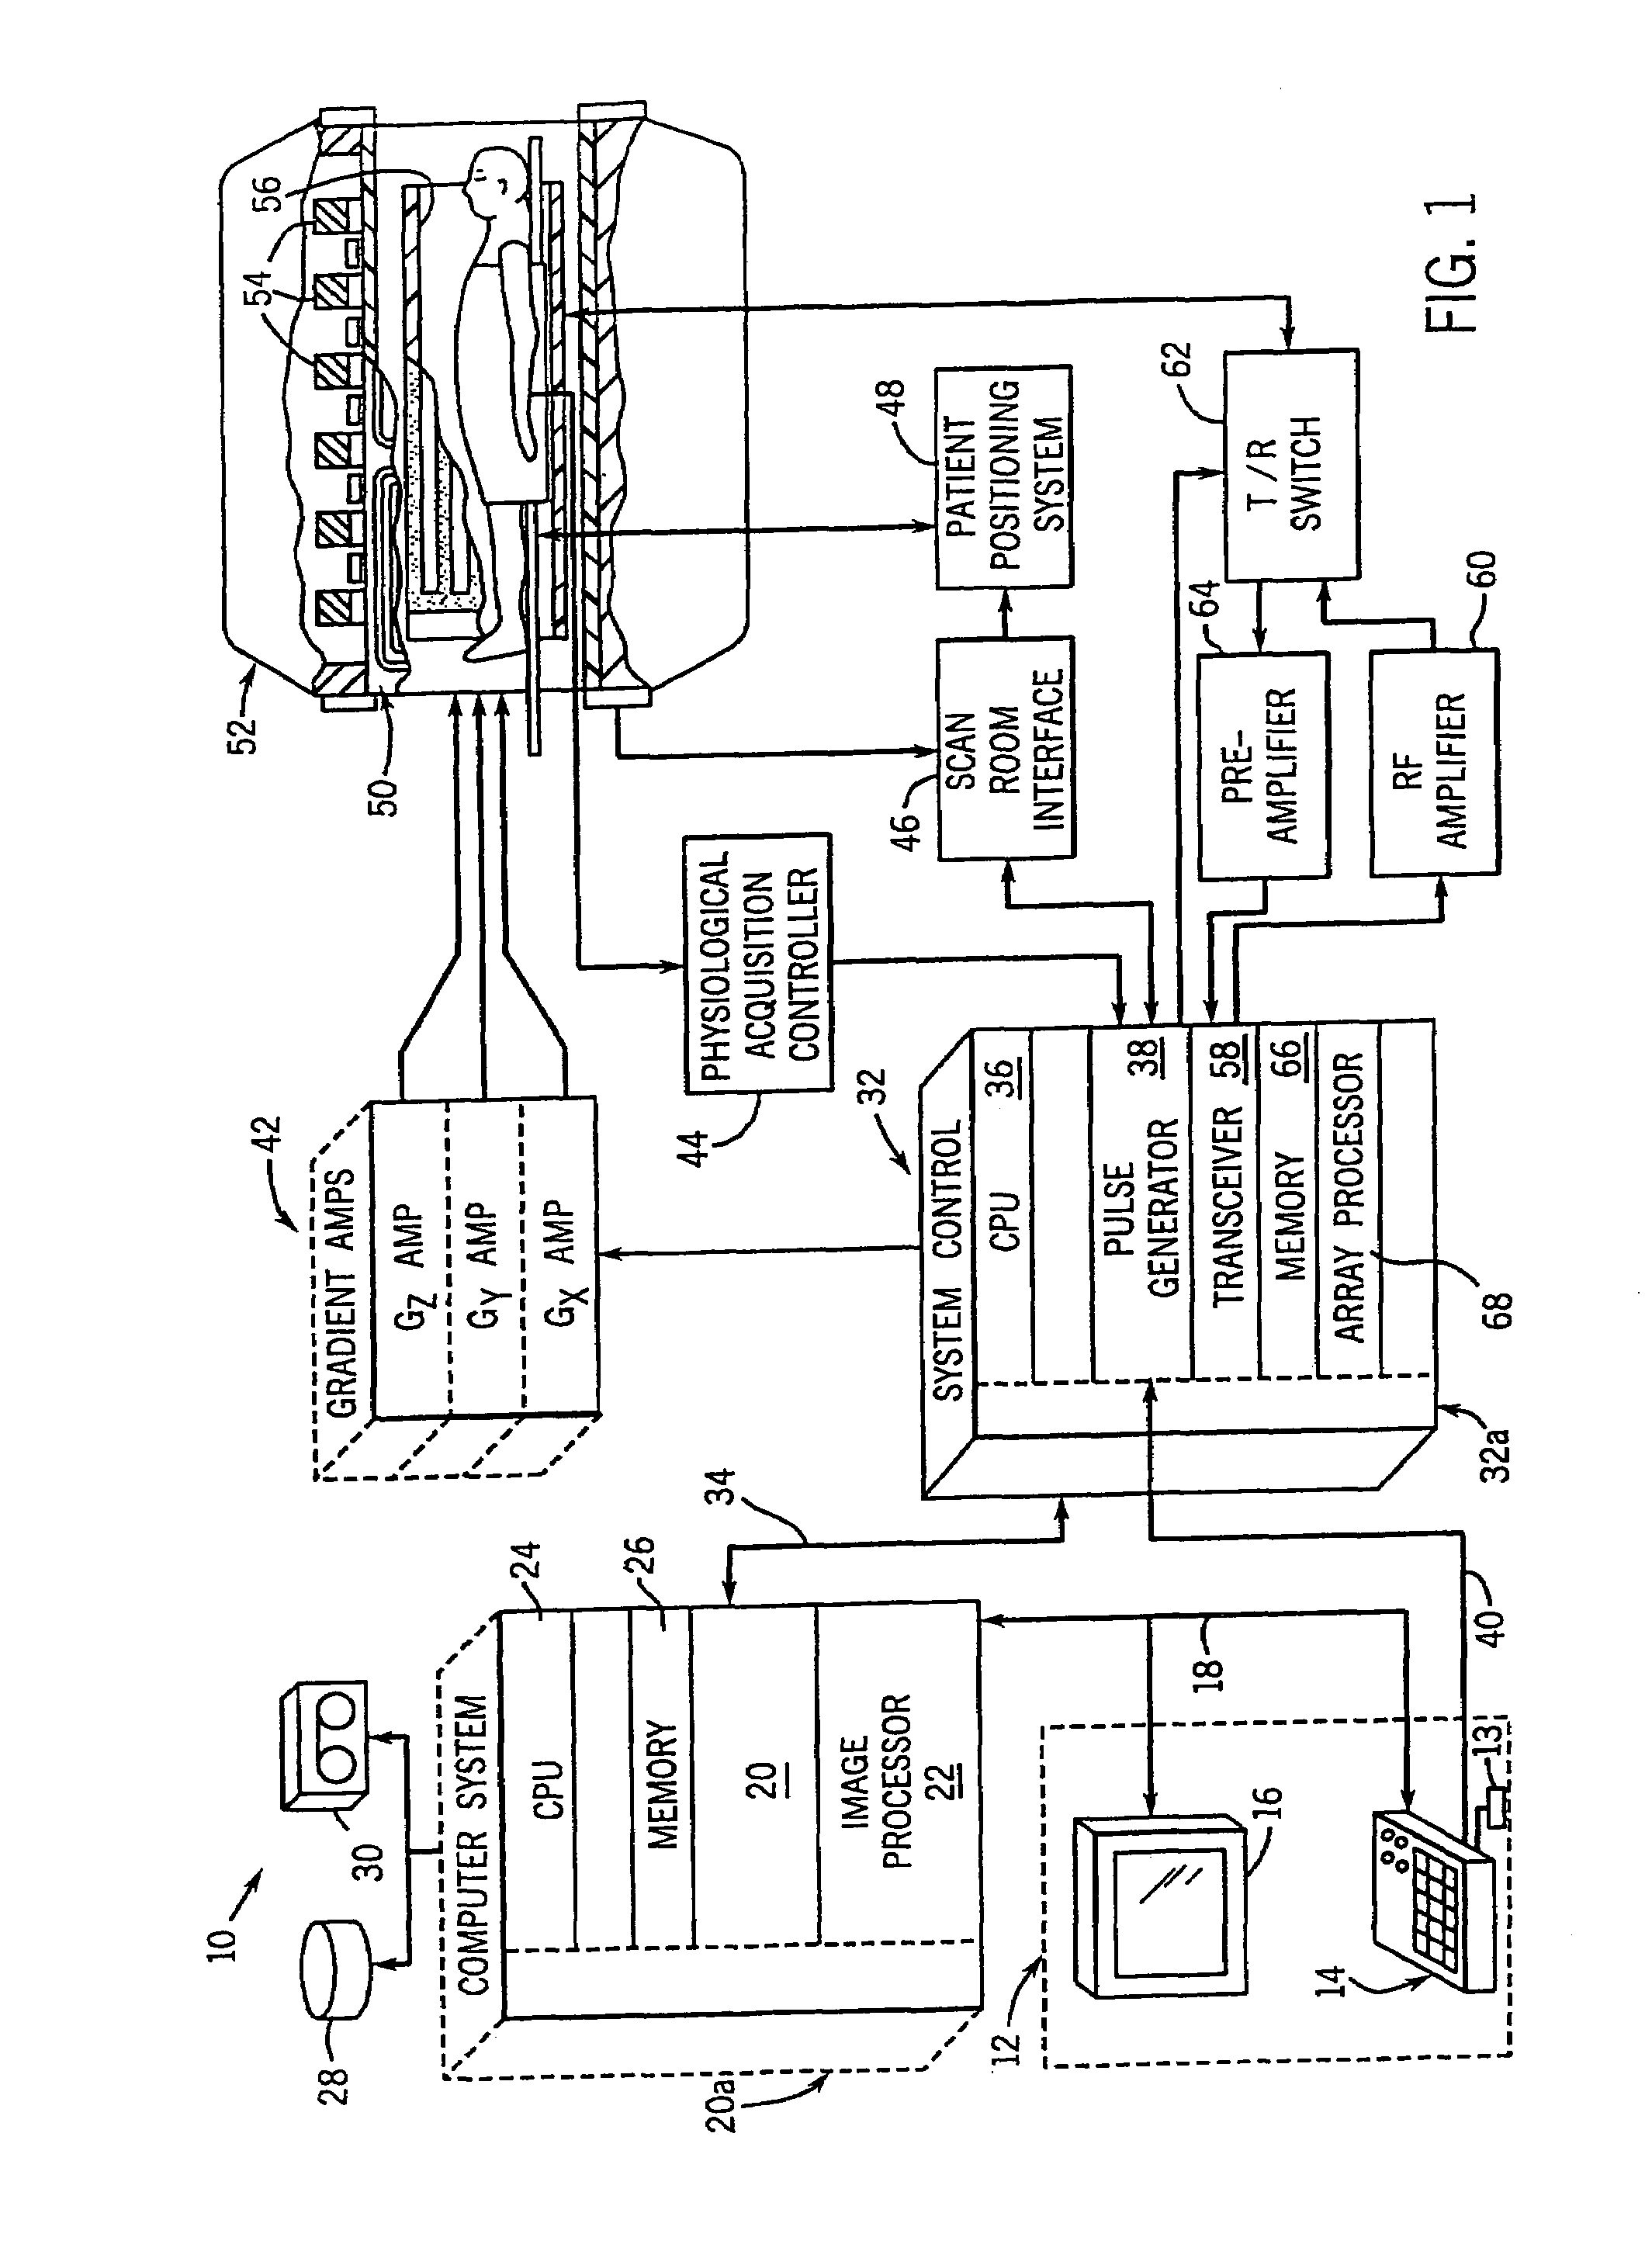 Method and system of determining parameters for MR data acquisition with real-time B<sub>1 </sub>optimization